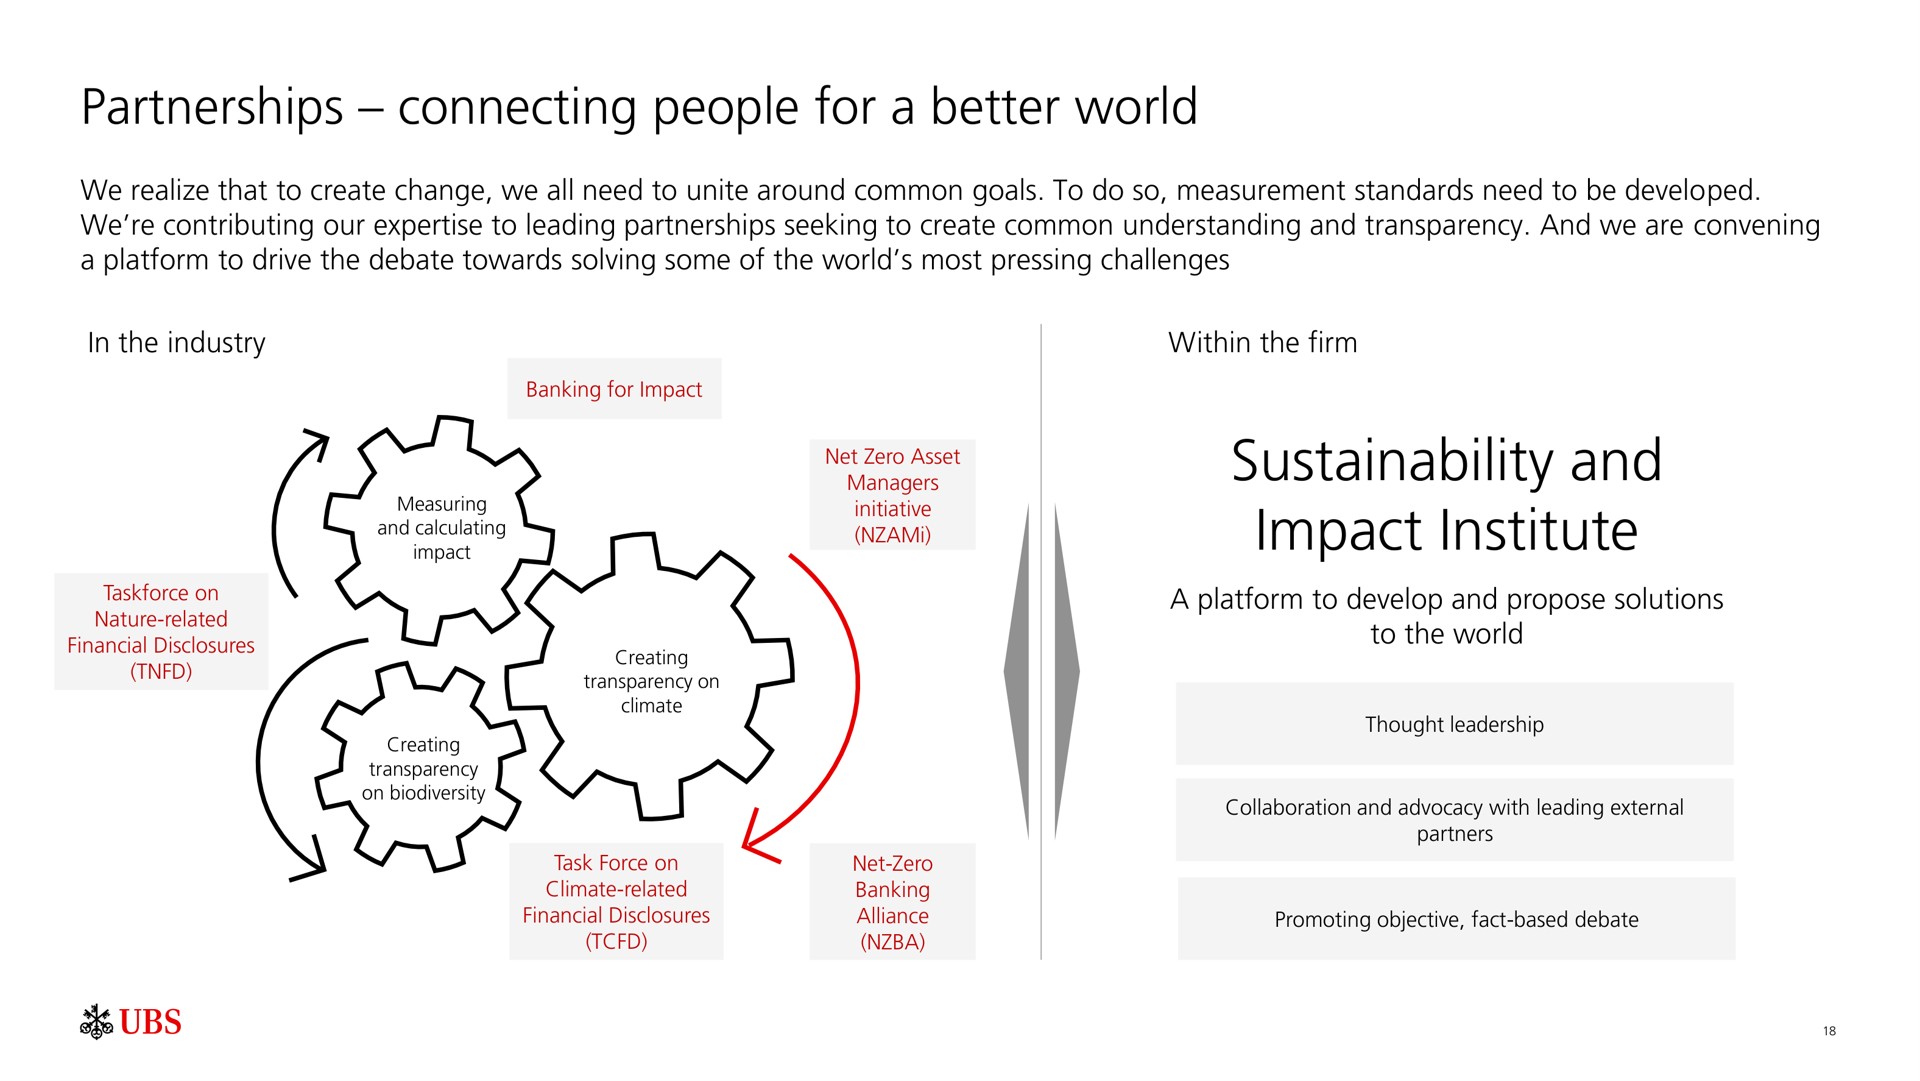 partnerships connecting people for a better world and impact institute mela ces wean | UBS